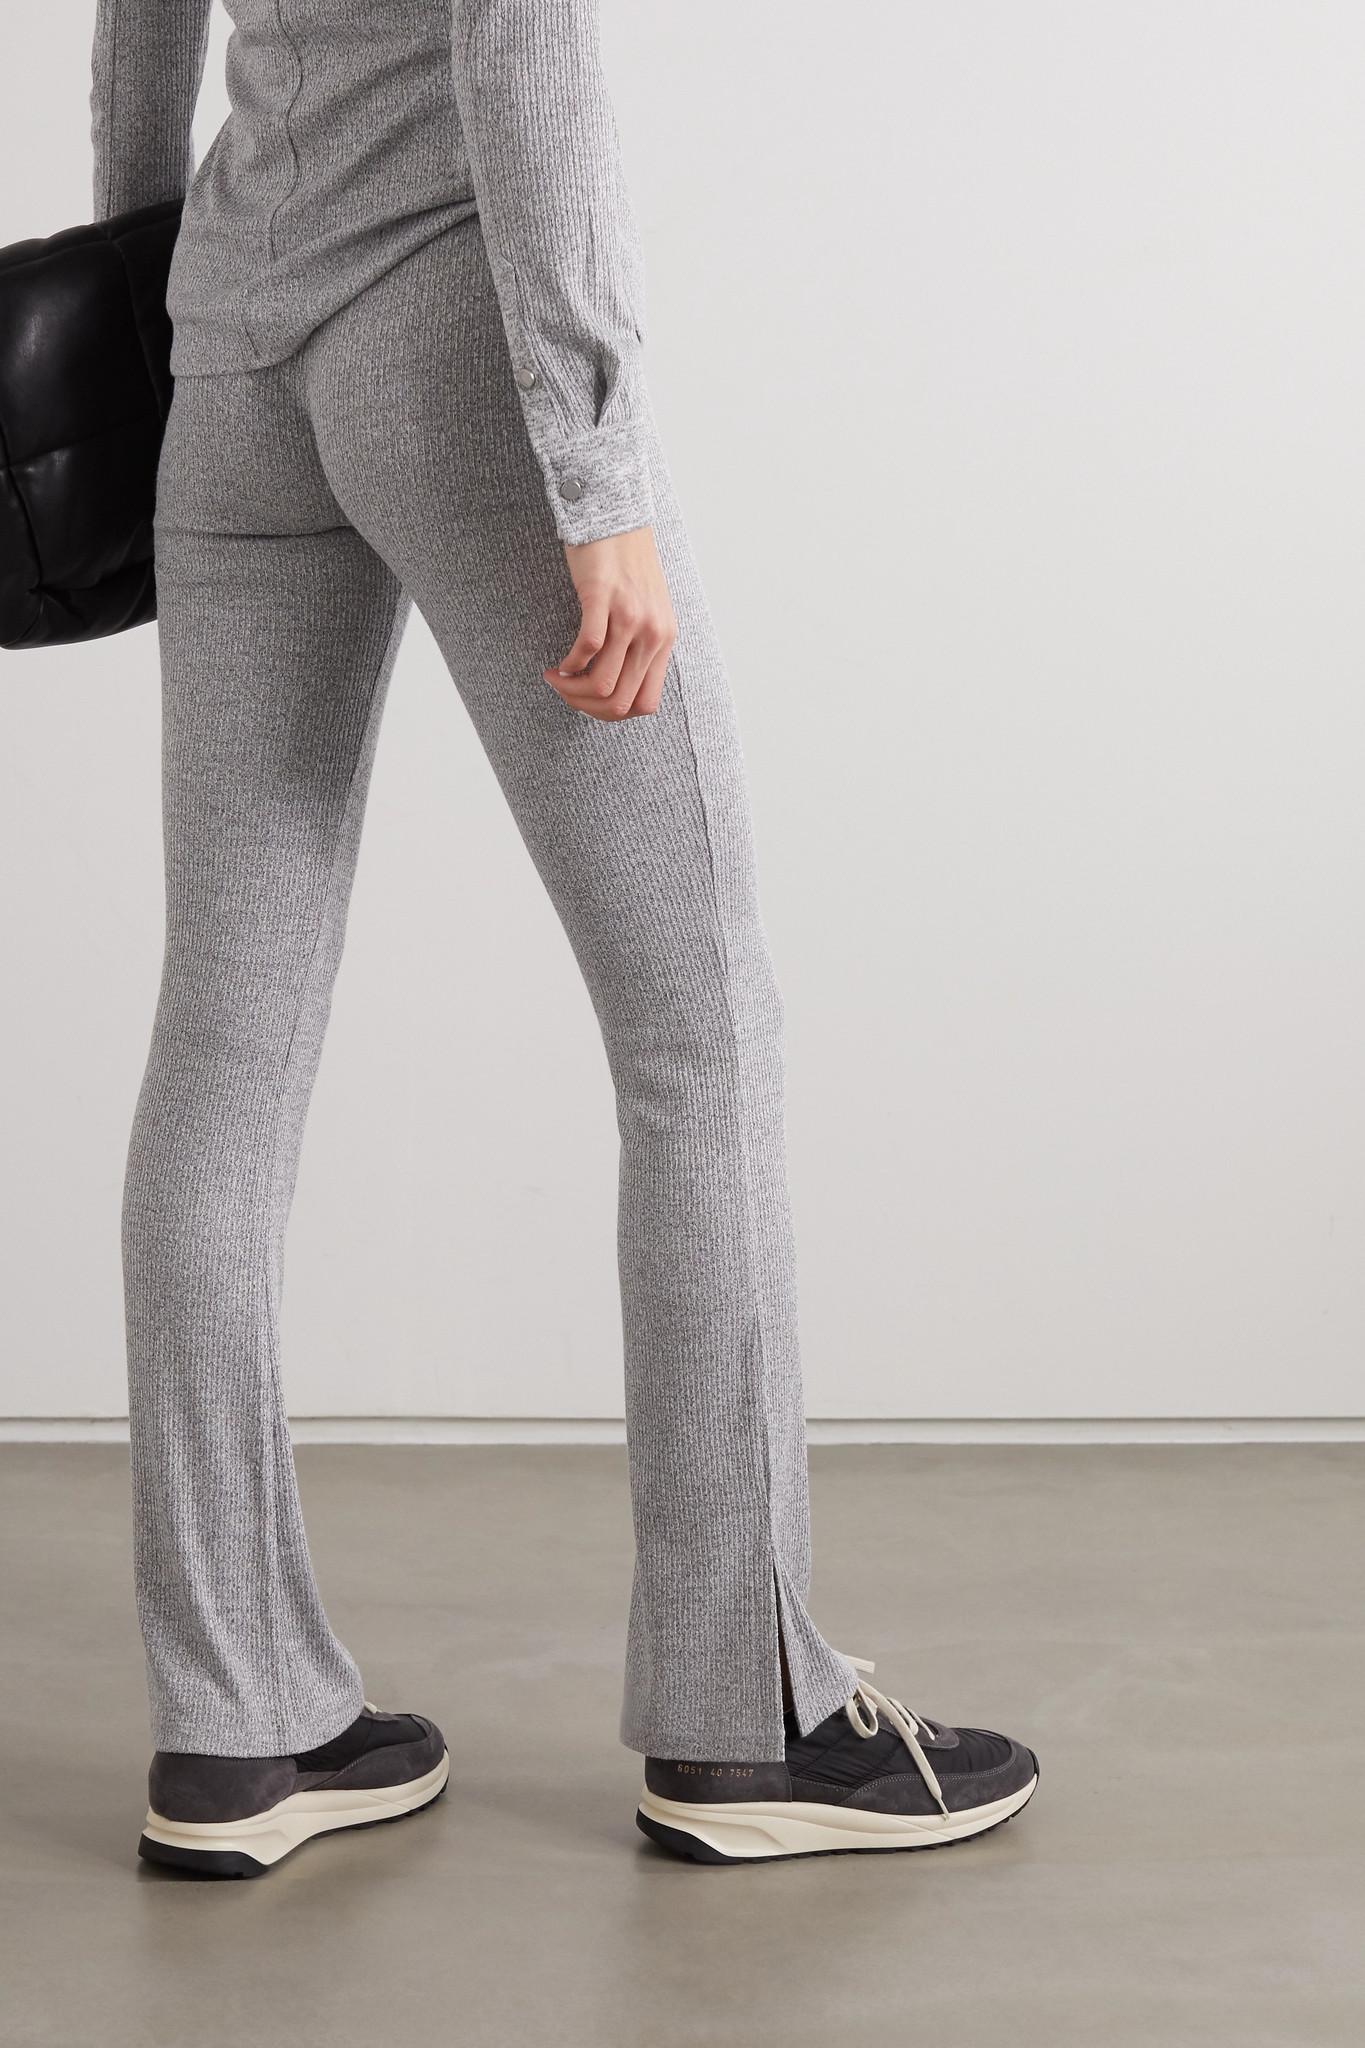 rag & bone Ponte Pants To Get Excited About: 2 Outfit Ideas - The